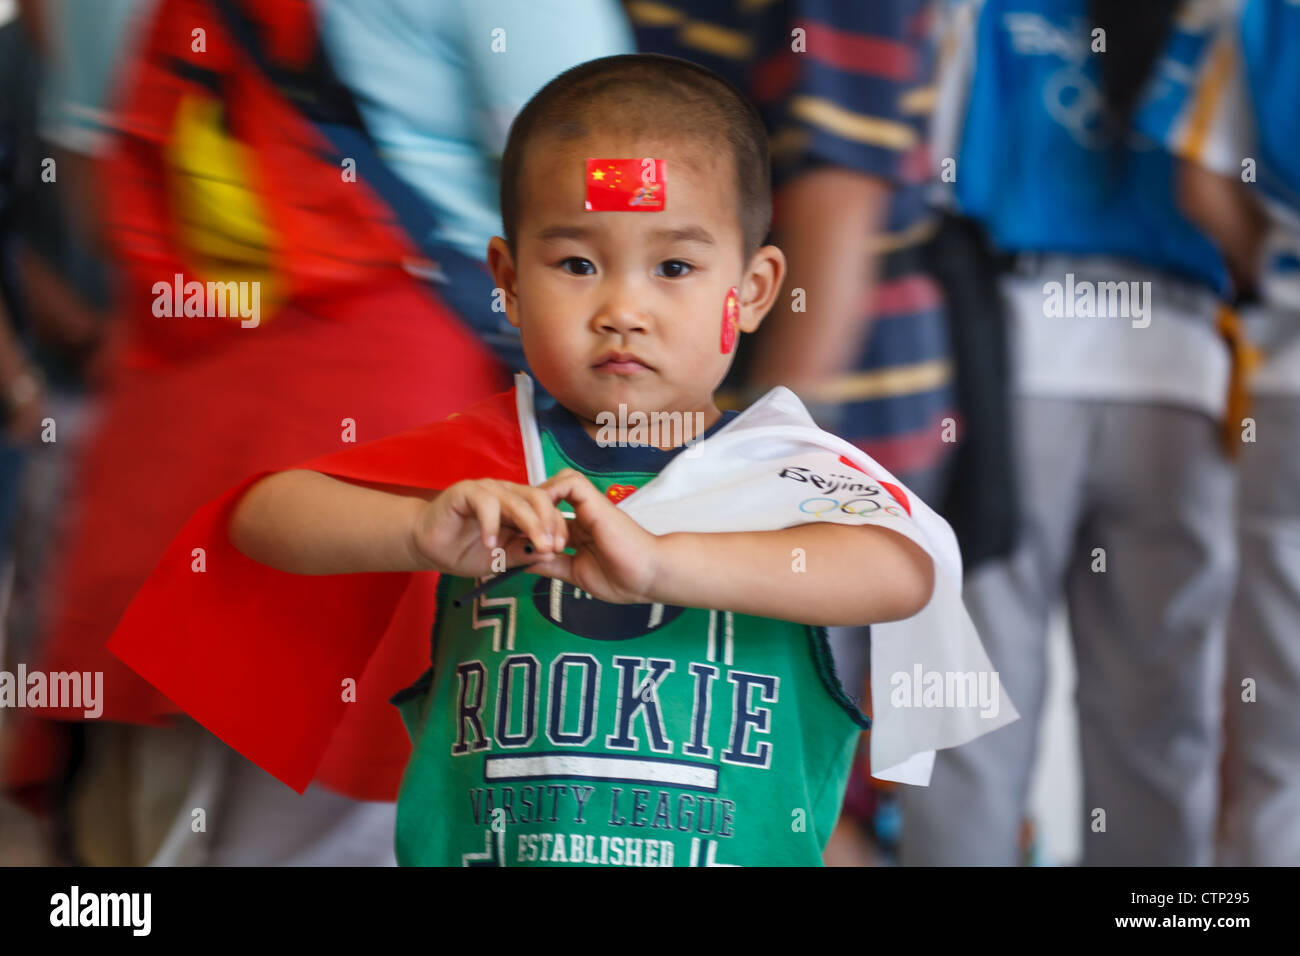 BEIJING, CHINA - AUGUST 22, 2008: young Chinese boy waving Chinese and Olympic flags in Olympic Village during the Summer Games Stock Photo